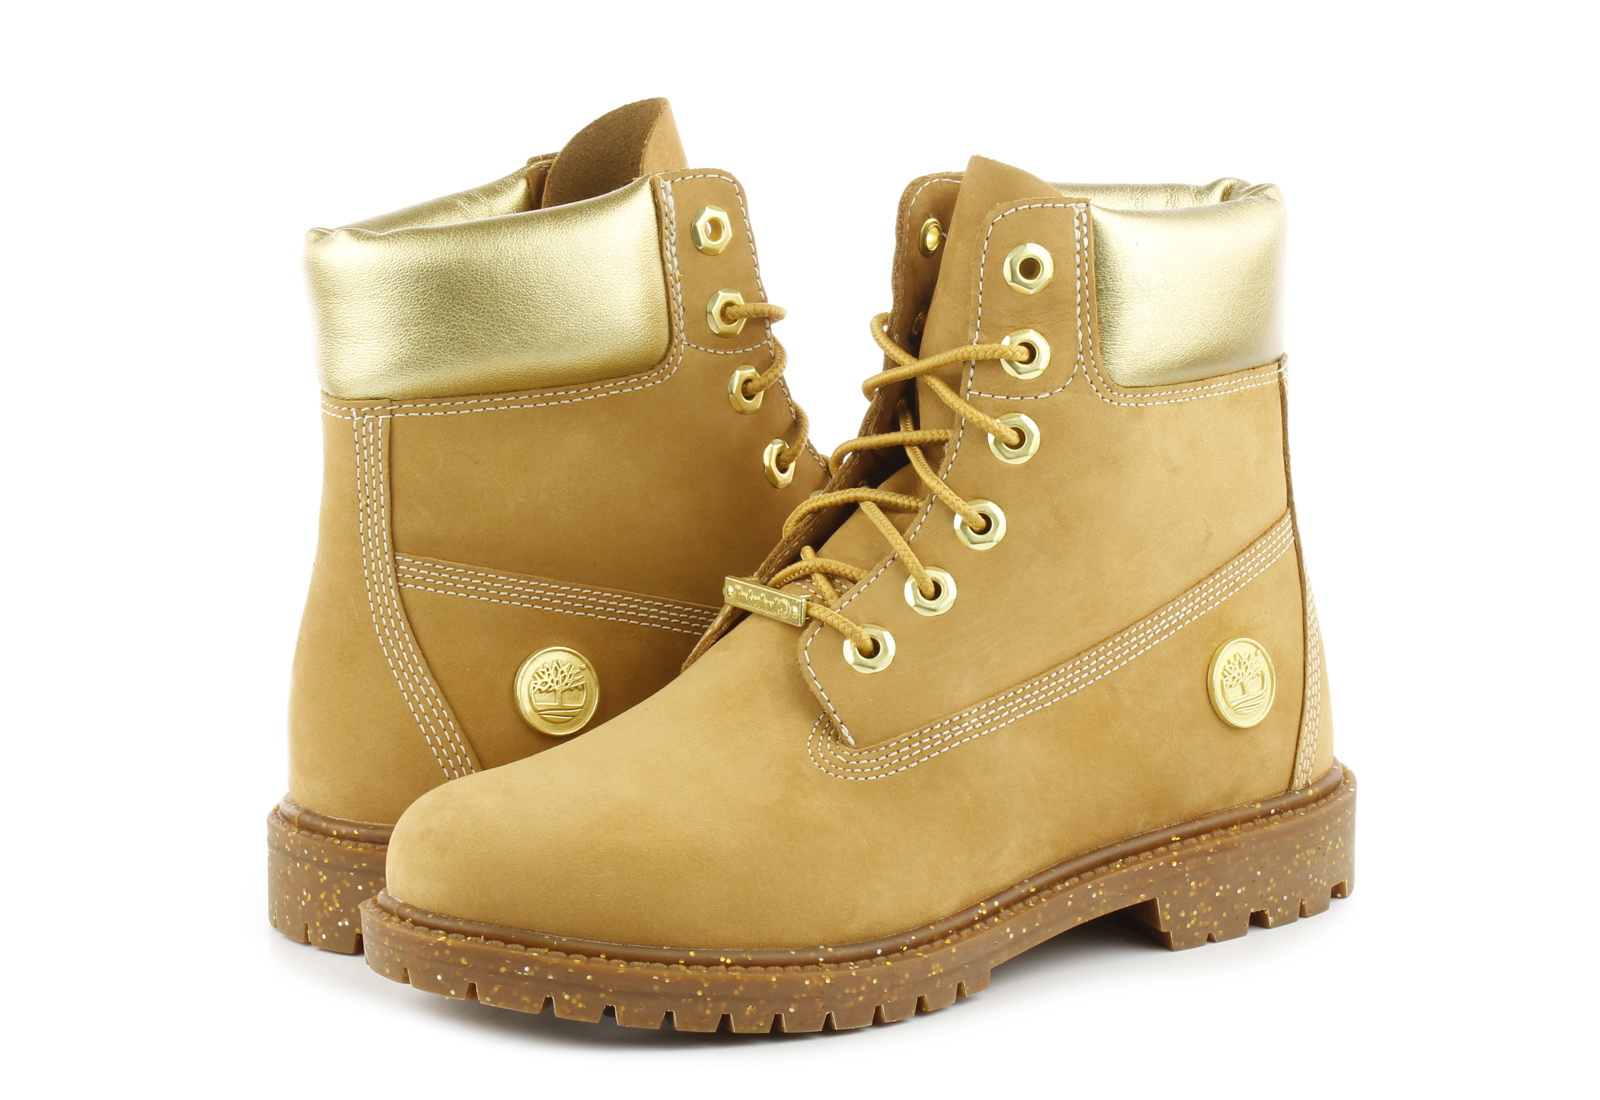 Timberland Outdoor cipele 6 In Prem Boot